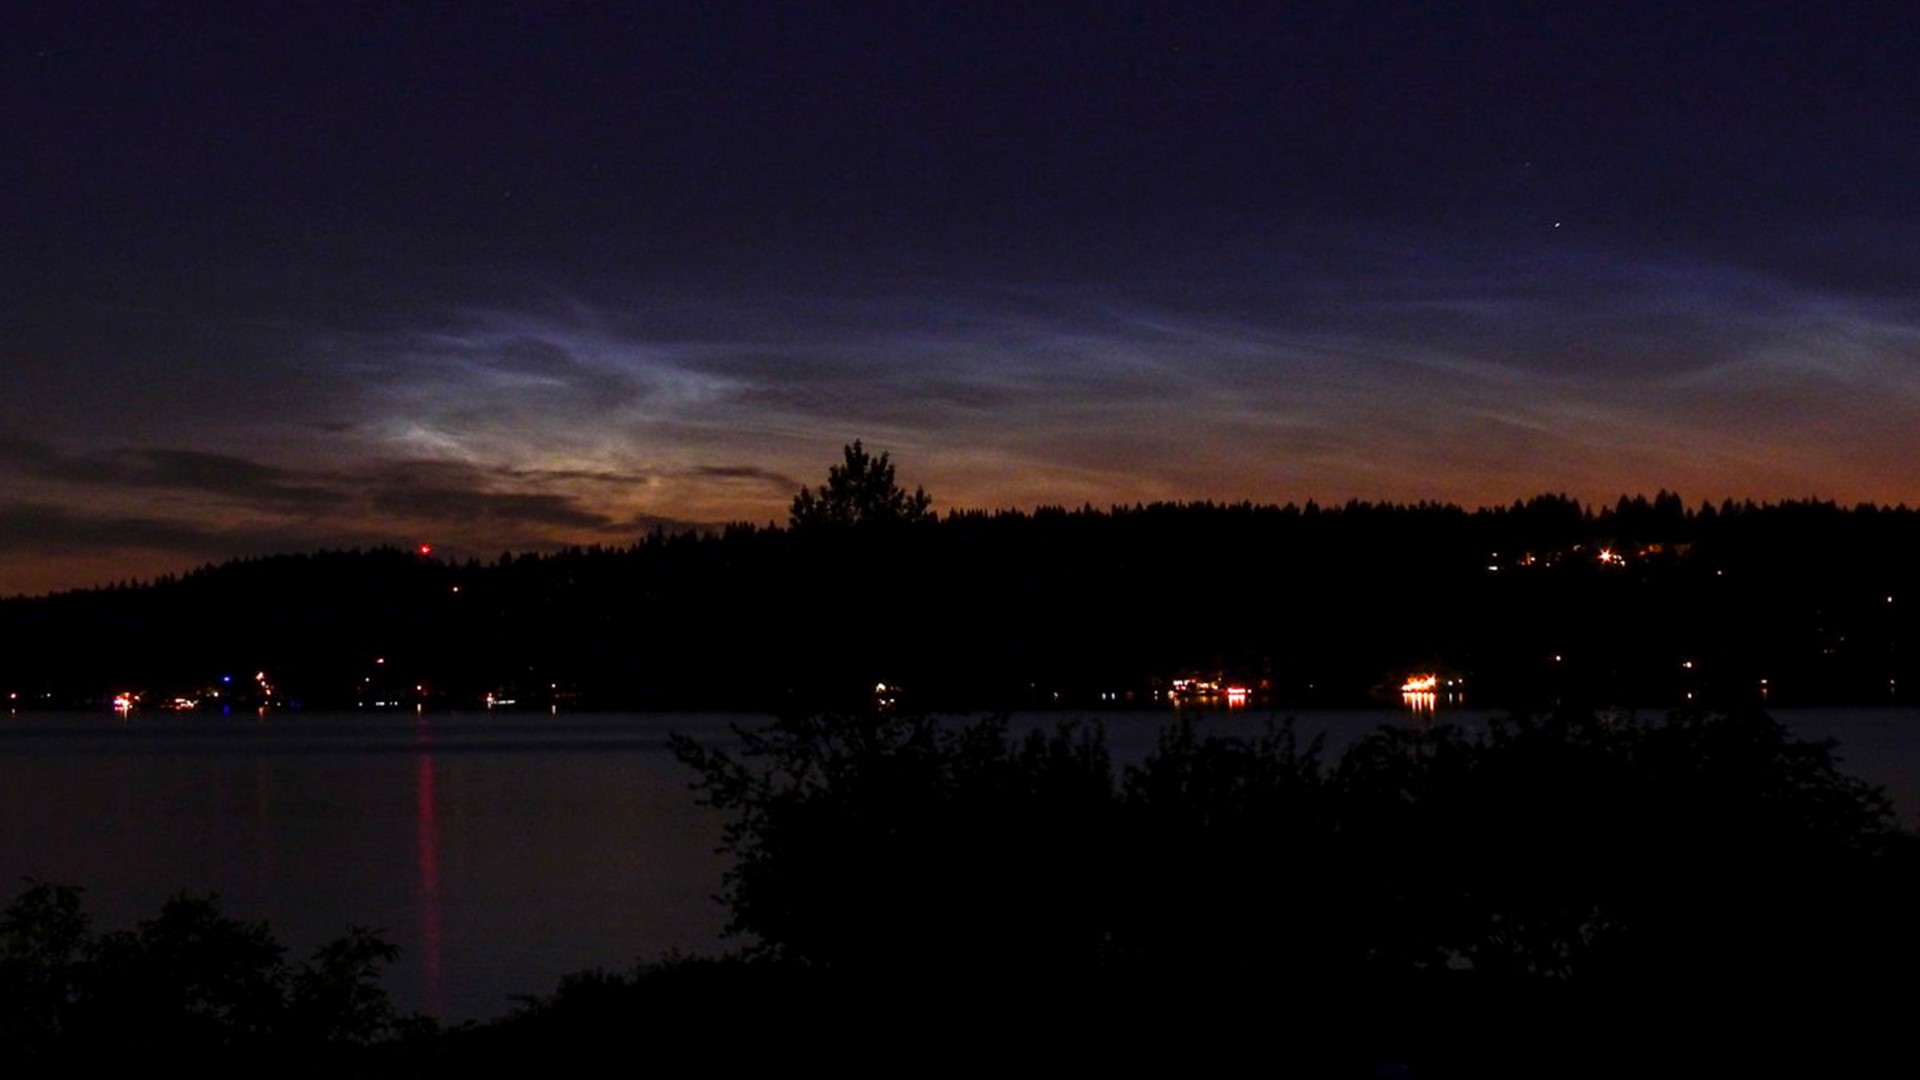 Noctilucent clouds are clouds that are high in the atmosphere and illuminated by the sun on the other side of the planet. They tend to be seen around the summer solstice.